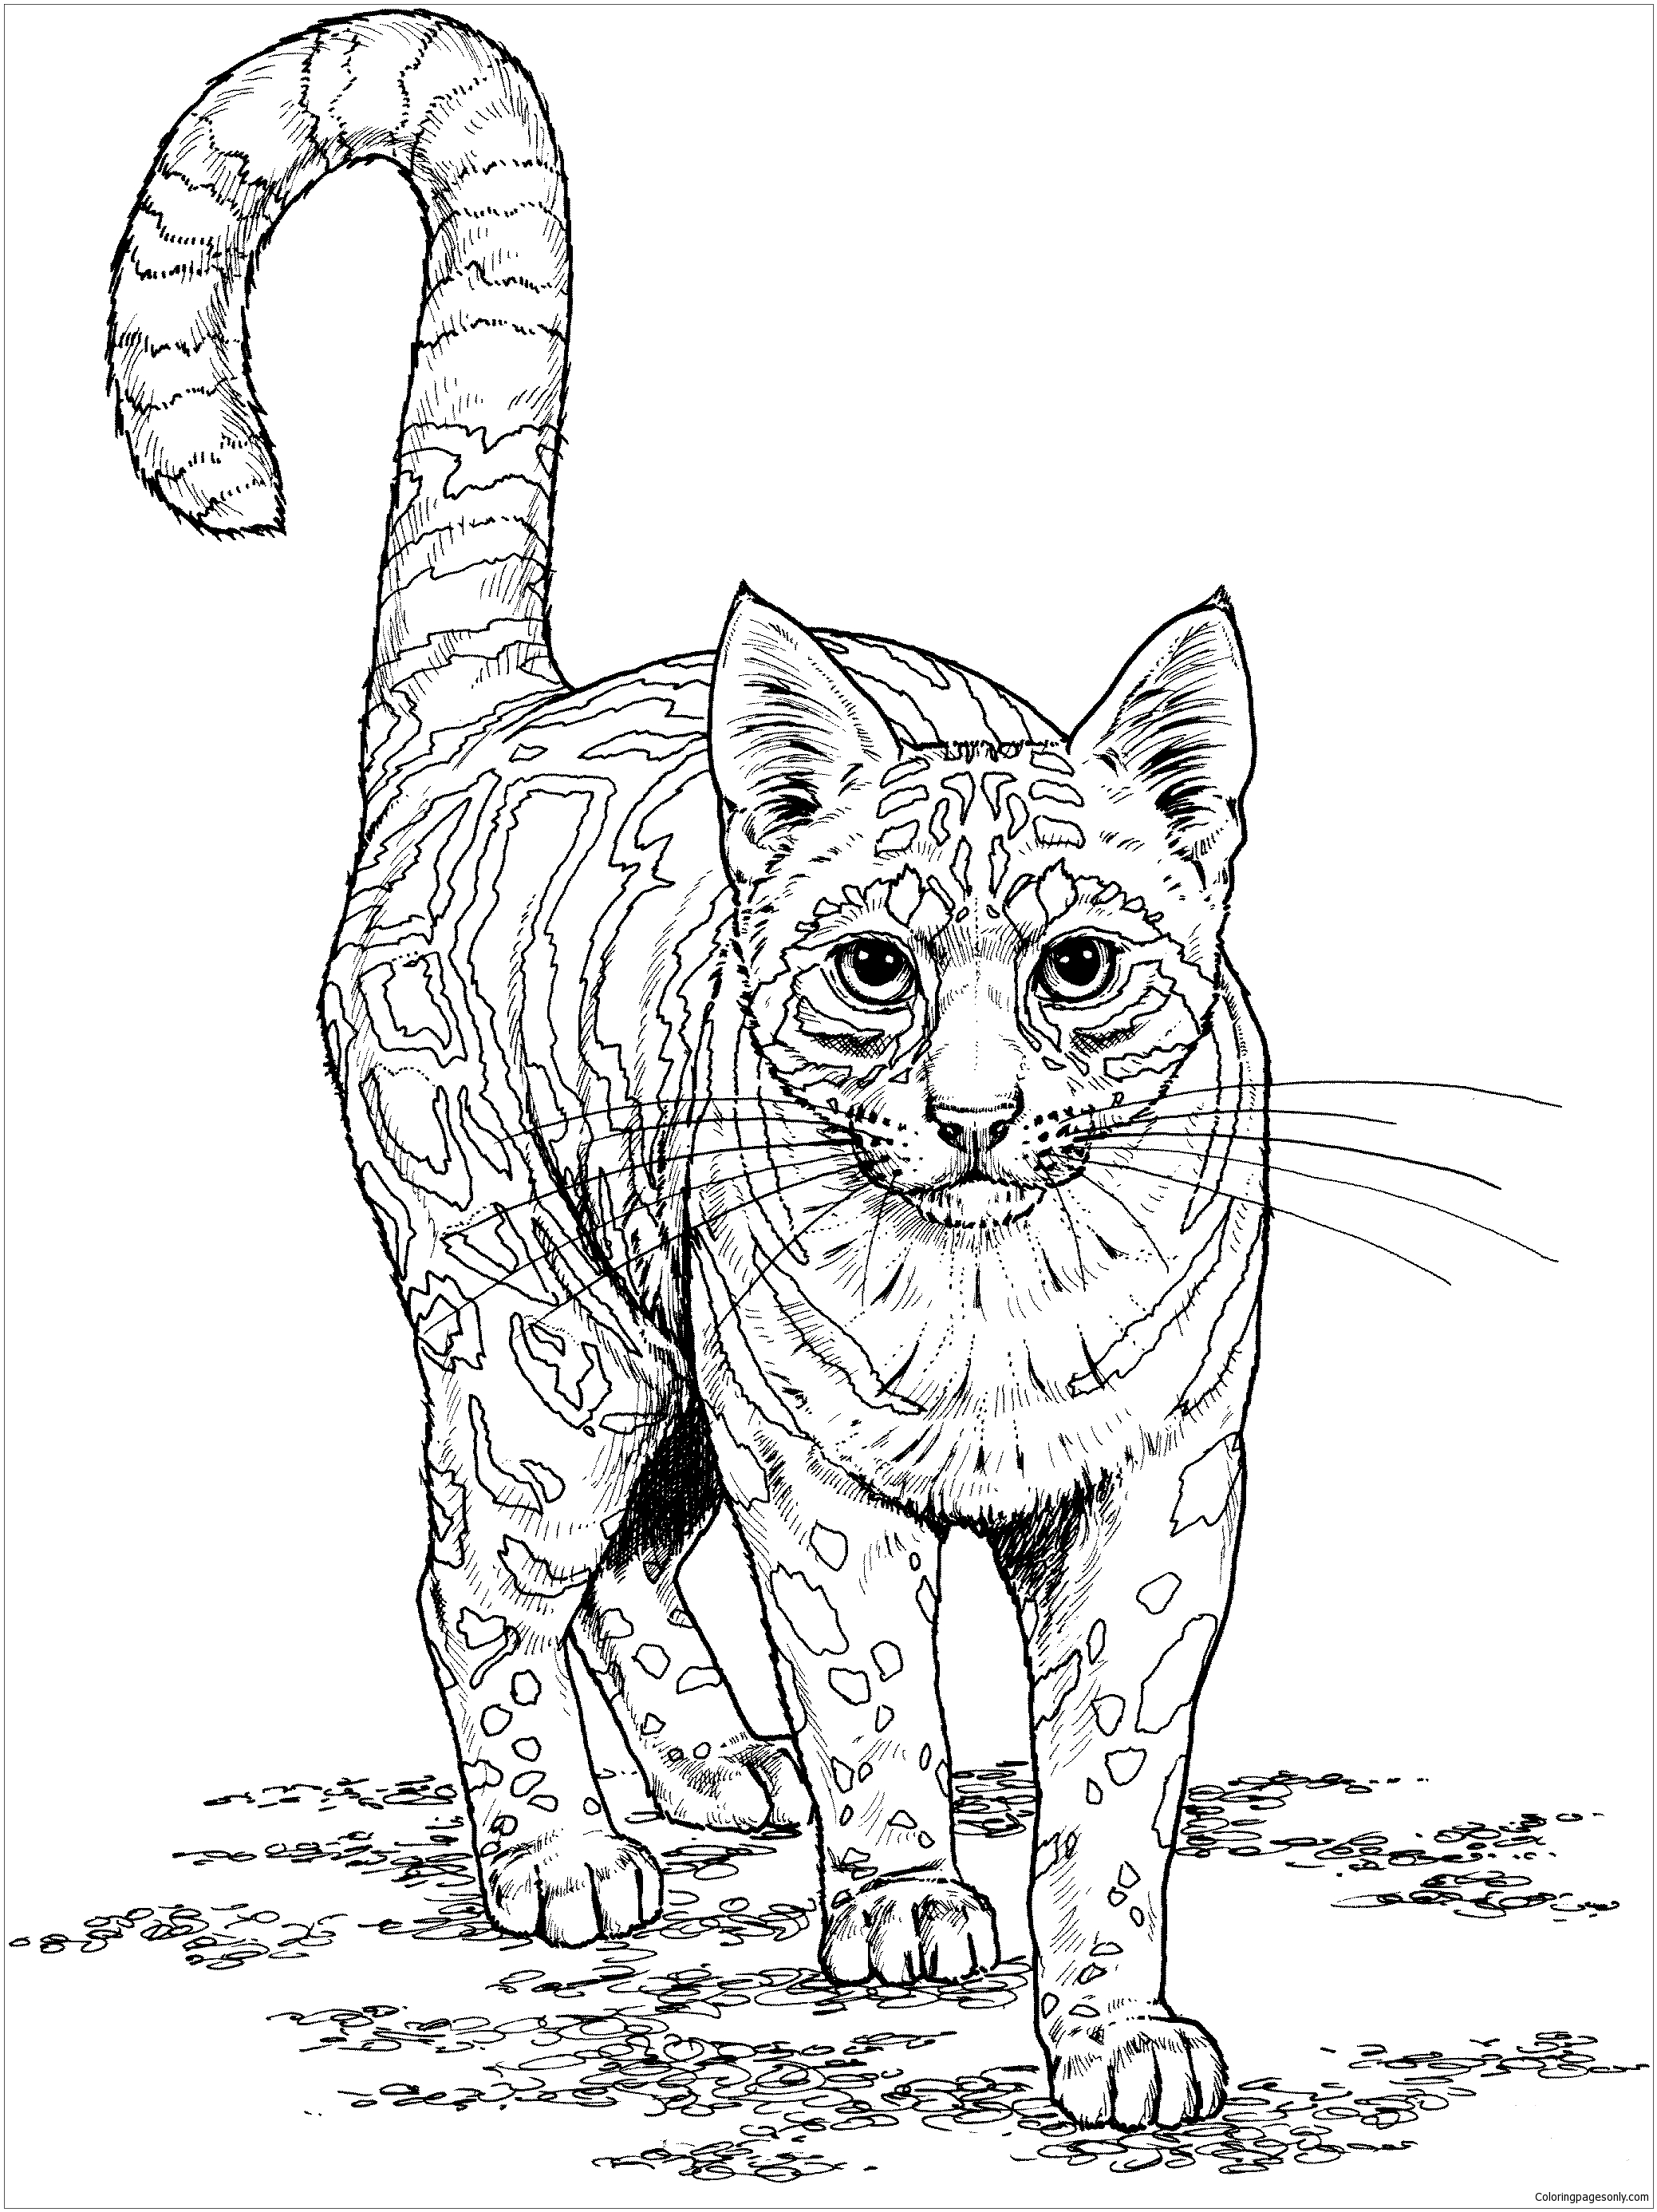 Ocelot Coloring Pages - Cat Coloring Pages - Coloring Pages For Kids